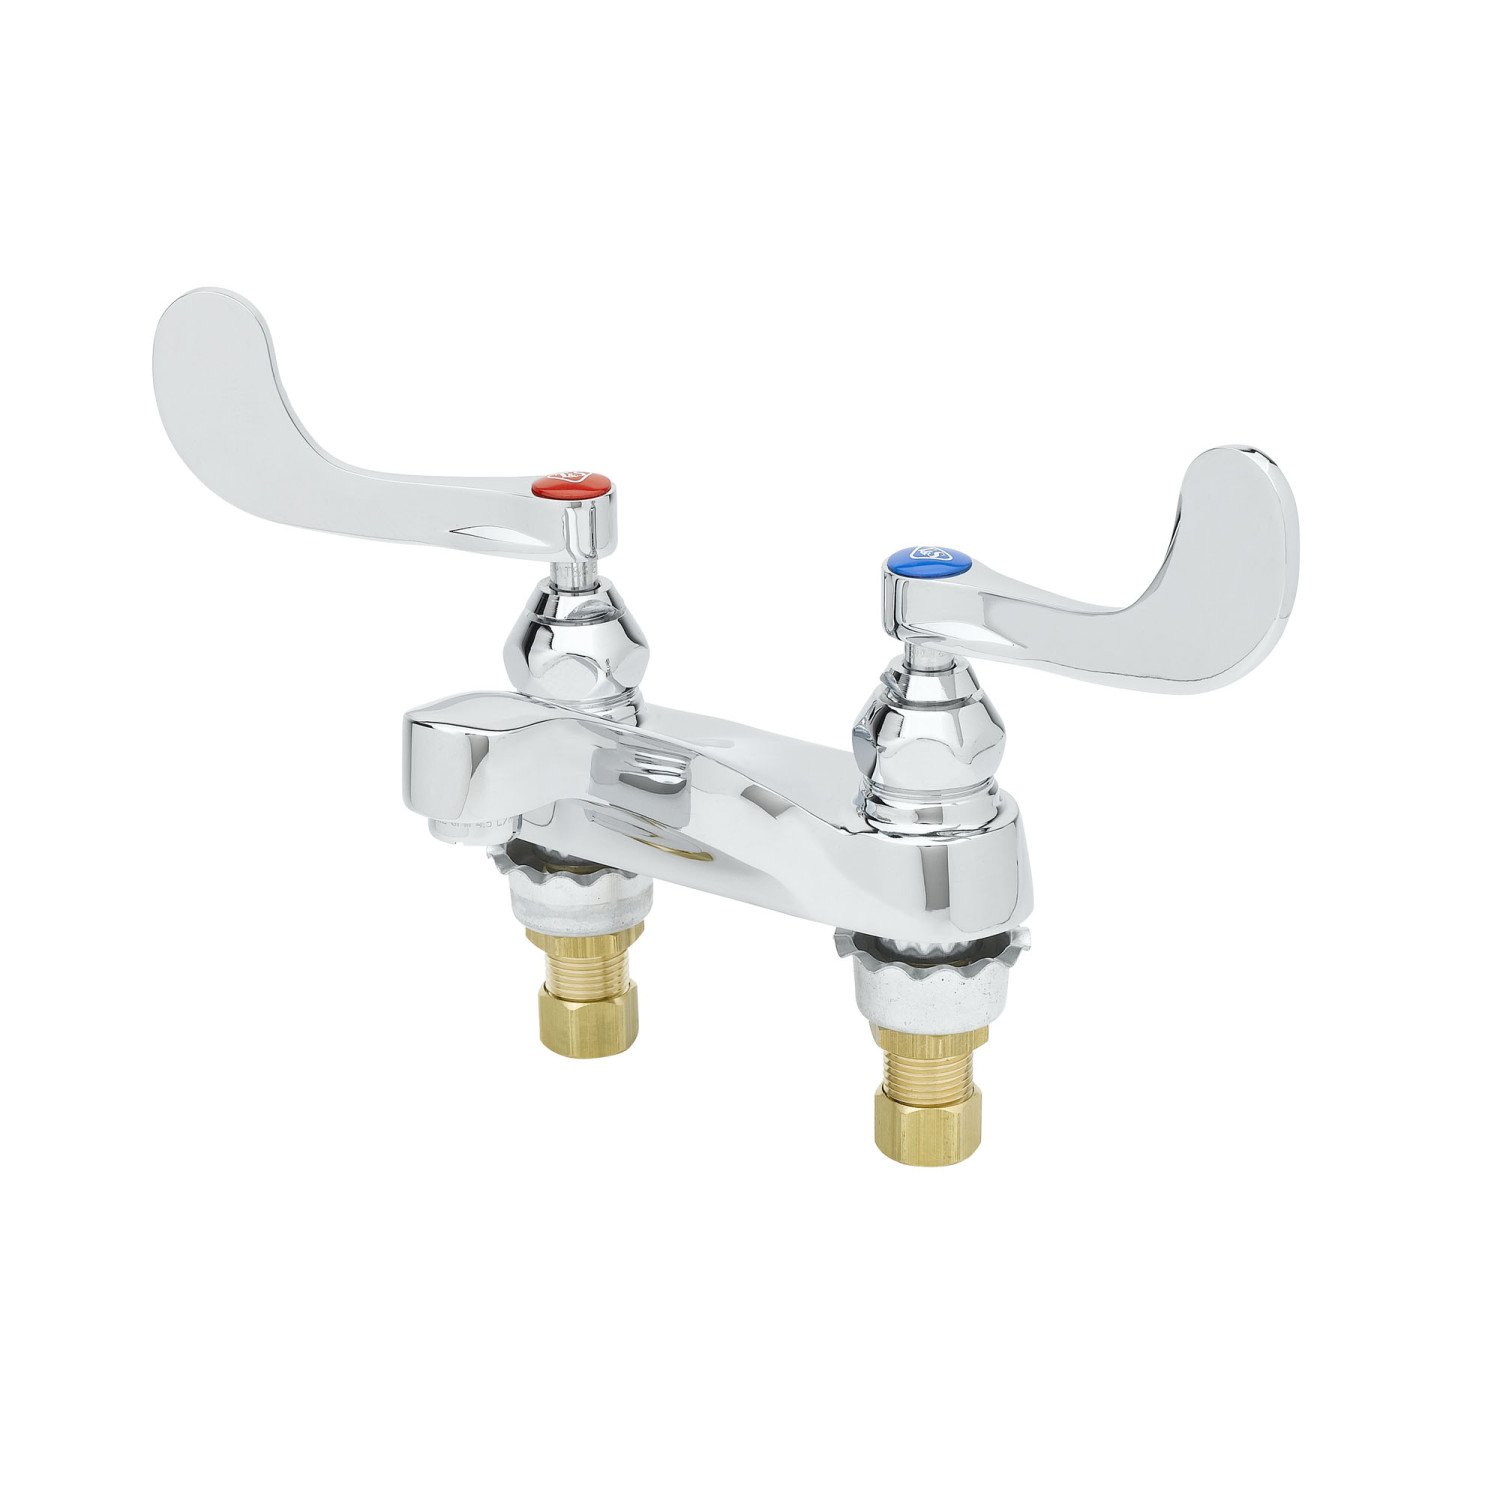 Medical & Lavatory Faucets: B-0890-F12 - T&S Brass